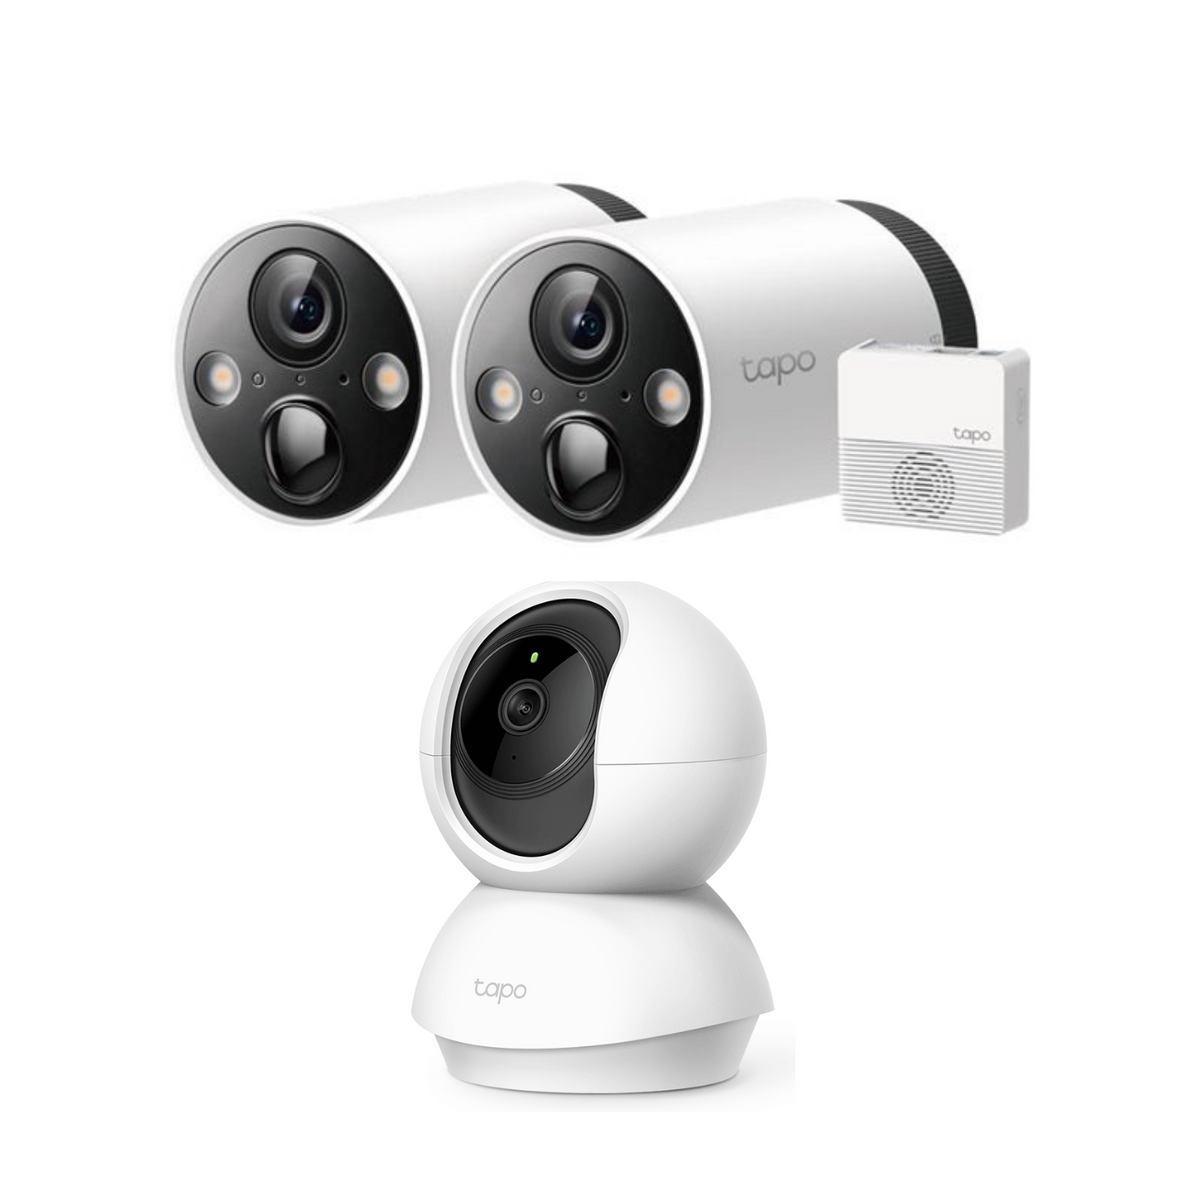 Tapo Smart Wire-Free Indoor &amp; Outdoor Security Camera System Bundle - White | TAPOSURVEILLANCEPACK from TP Link - DID Electrical